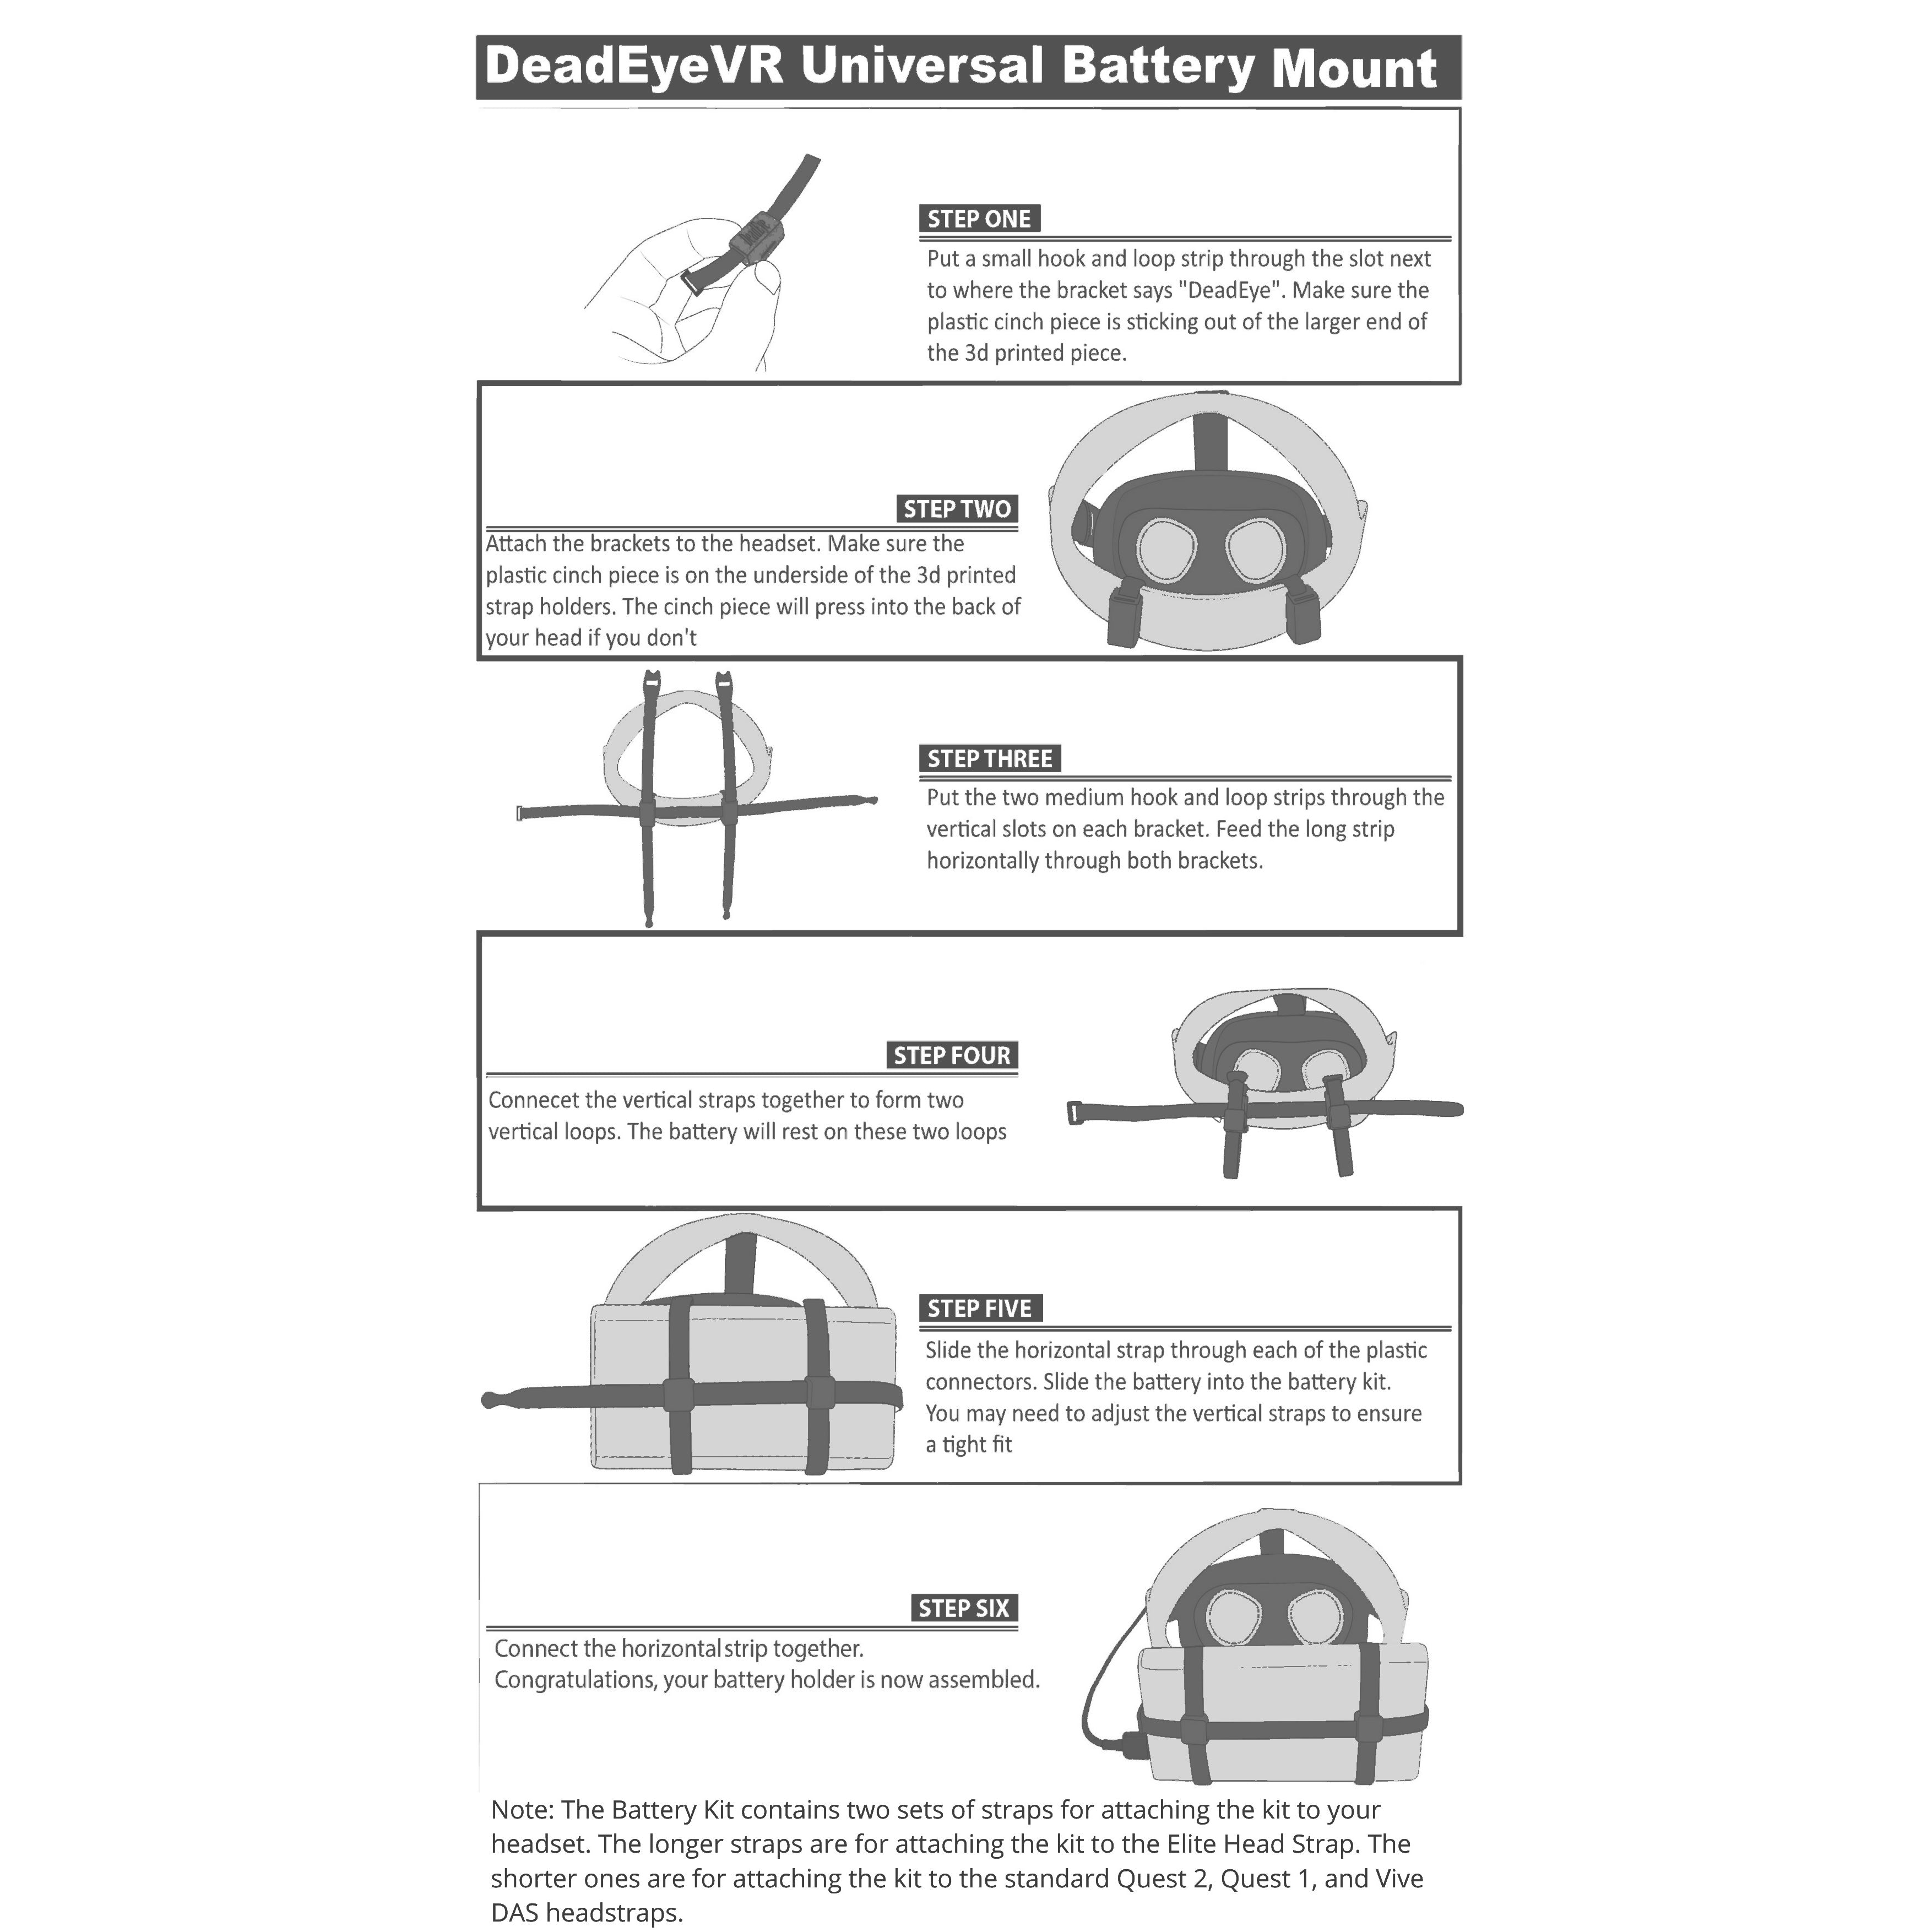 Instructions for product assembly 